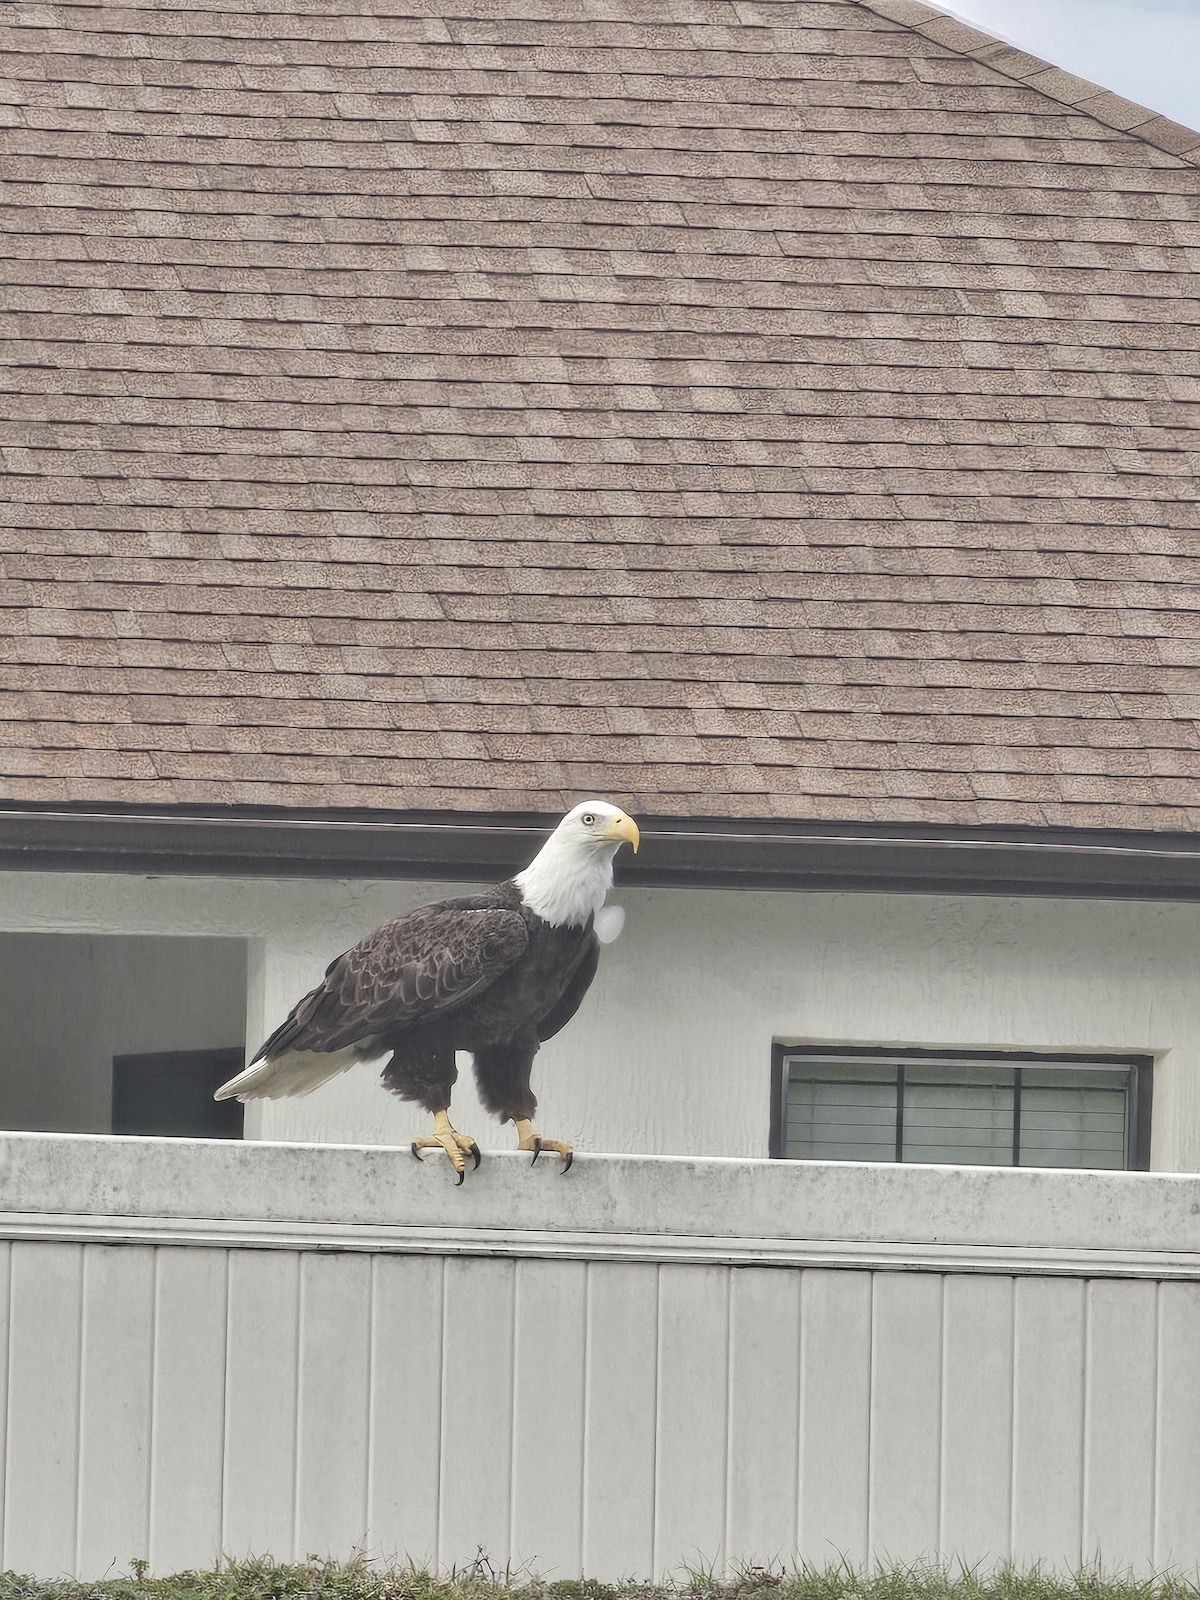 Bald eagle perched on fence in Ocala